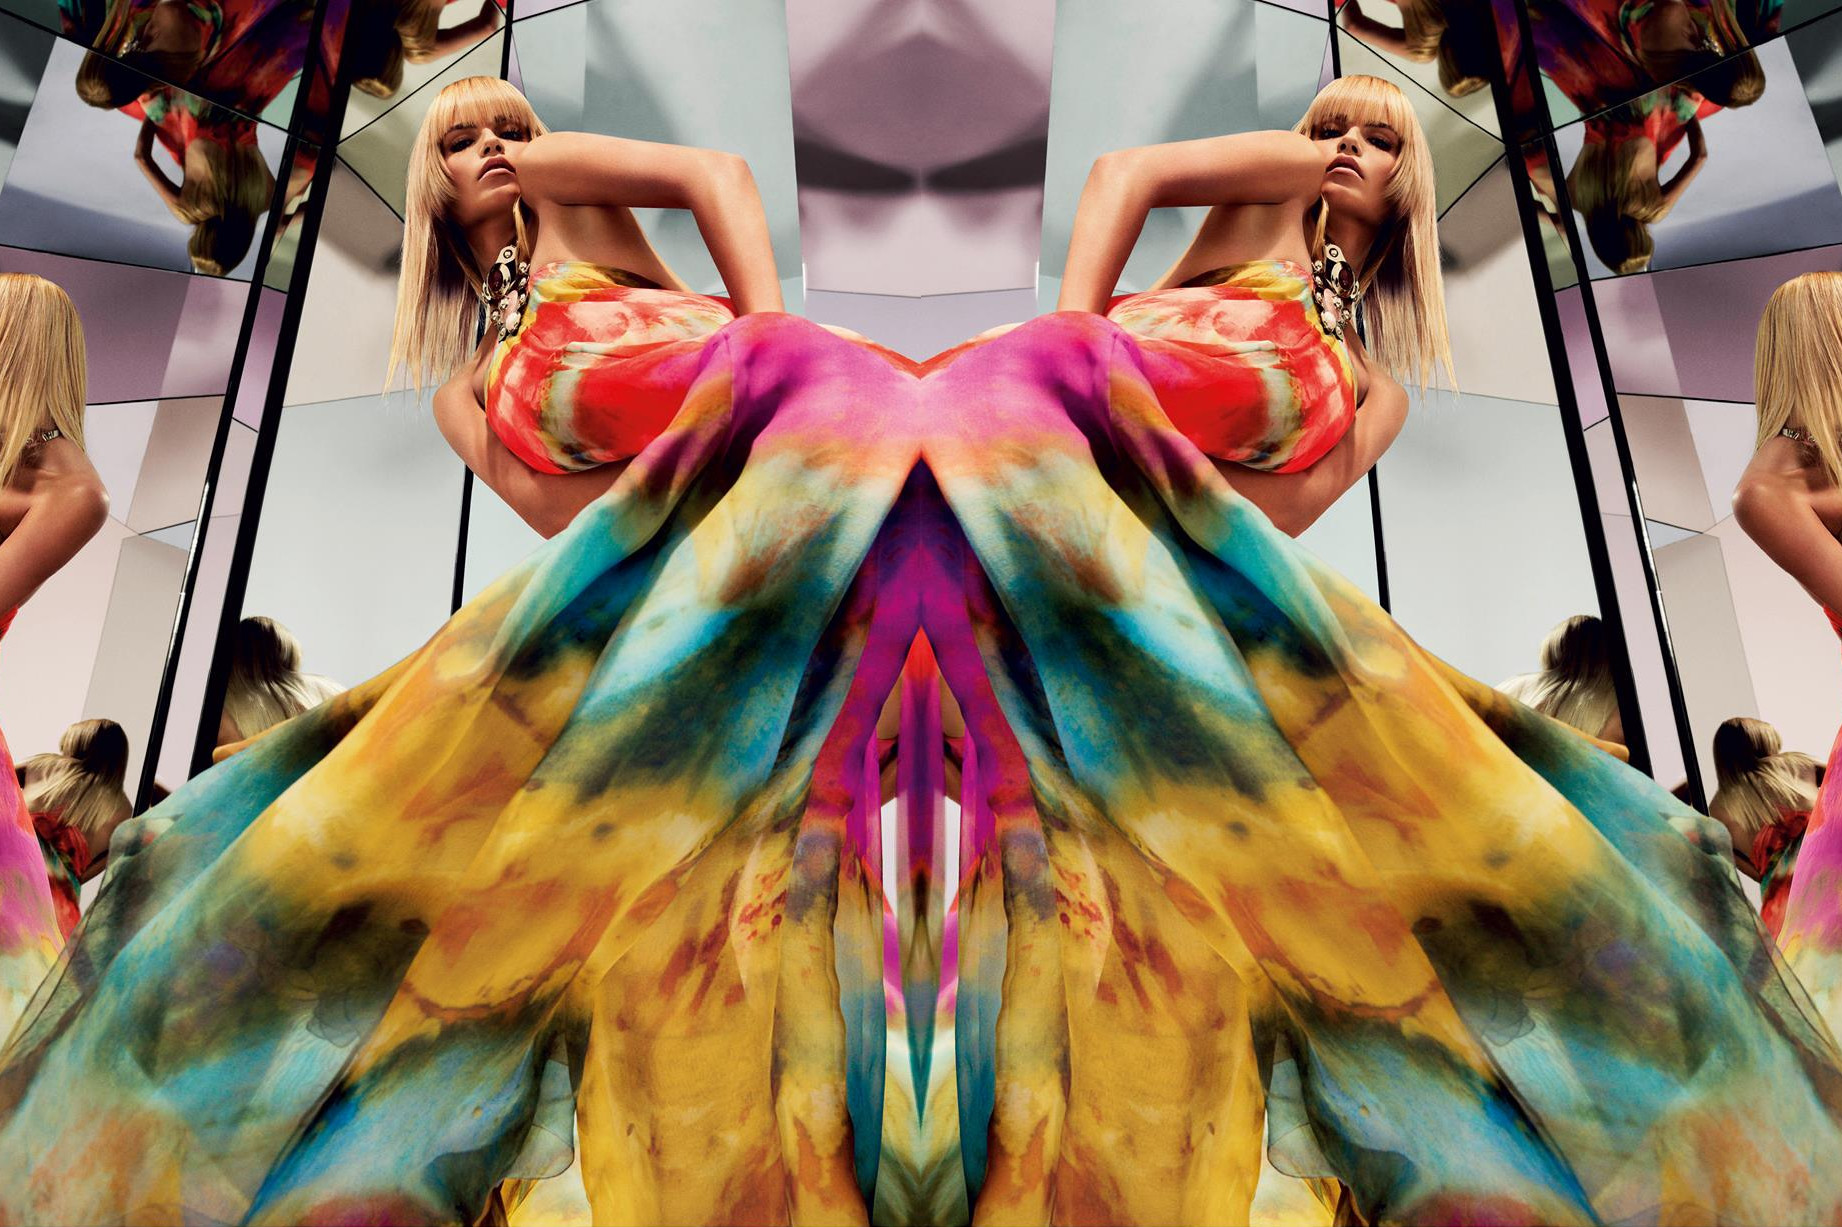 Emilio Pucci - A Brand Couture with a twist - Life in Italy